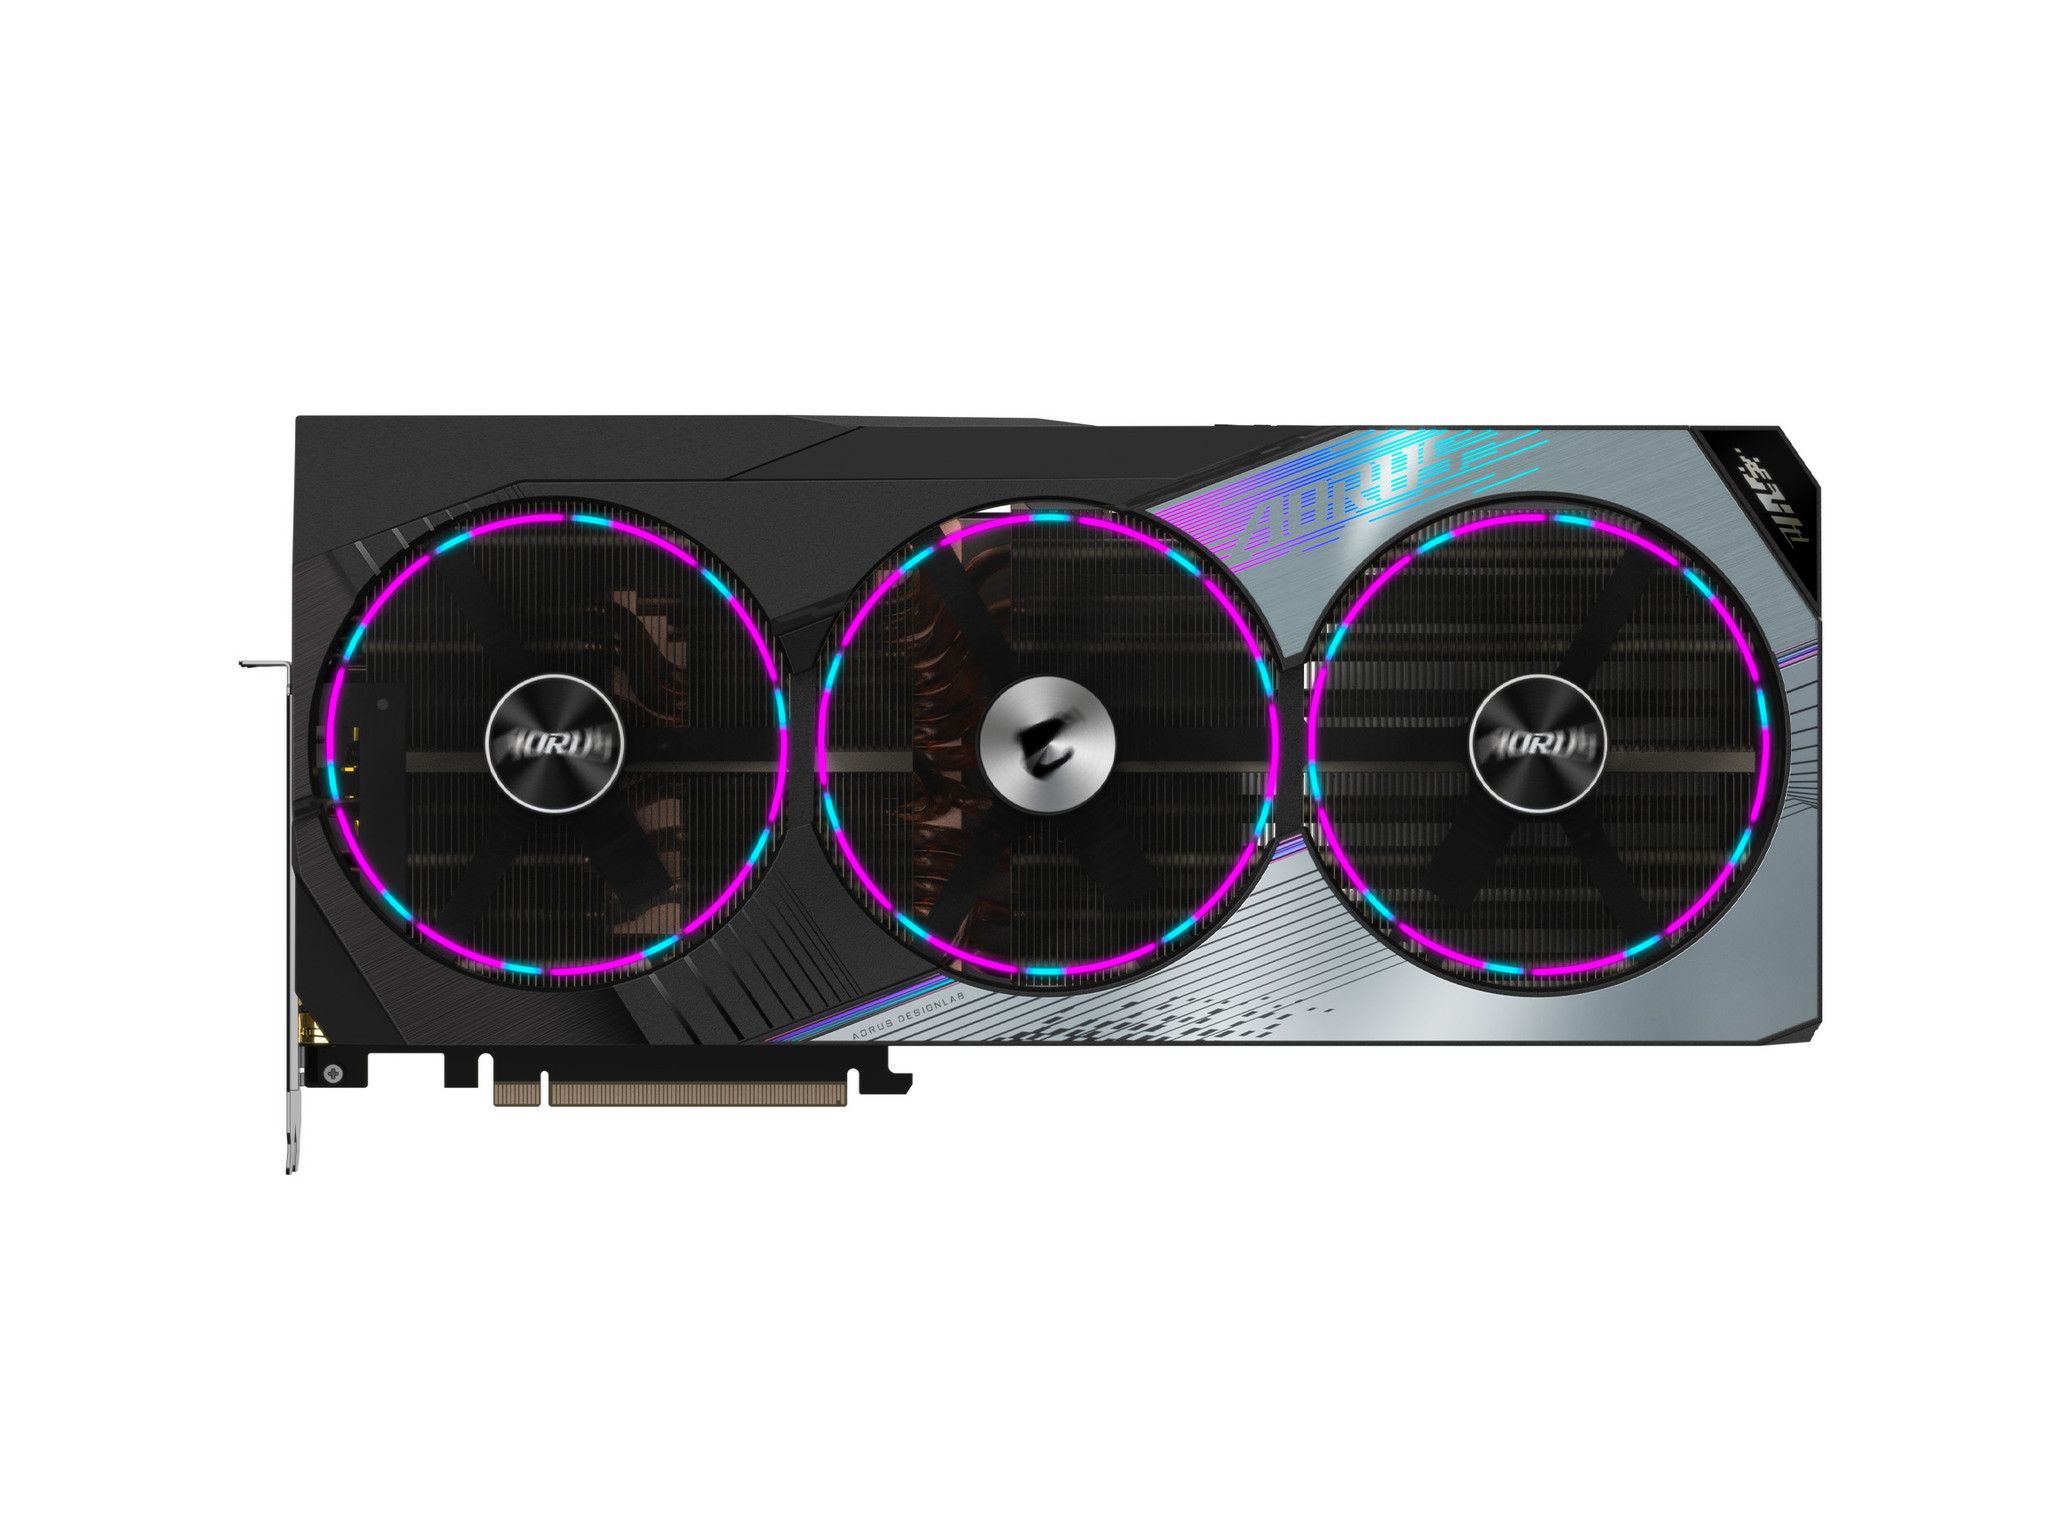 GIGABYTE Video Card NVIDIA GeForce RTX 4090 AORUS MASTER 24G, GDDR6X 24GB/384bit, PCI-E 4.0, 1x HDMI, 3x DP, 1x 16pin power, 1000W recommended PSU, ATX, Retail_1